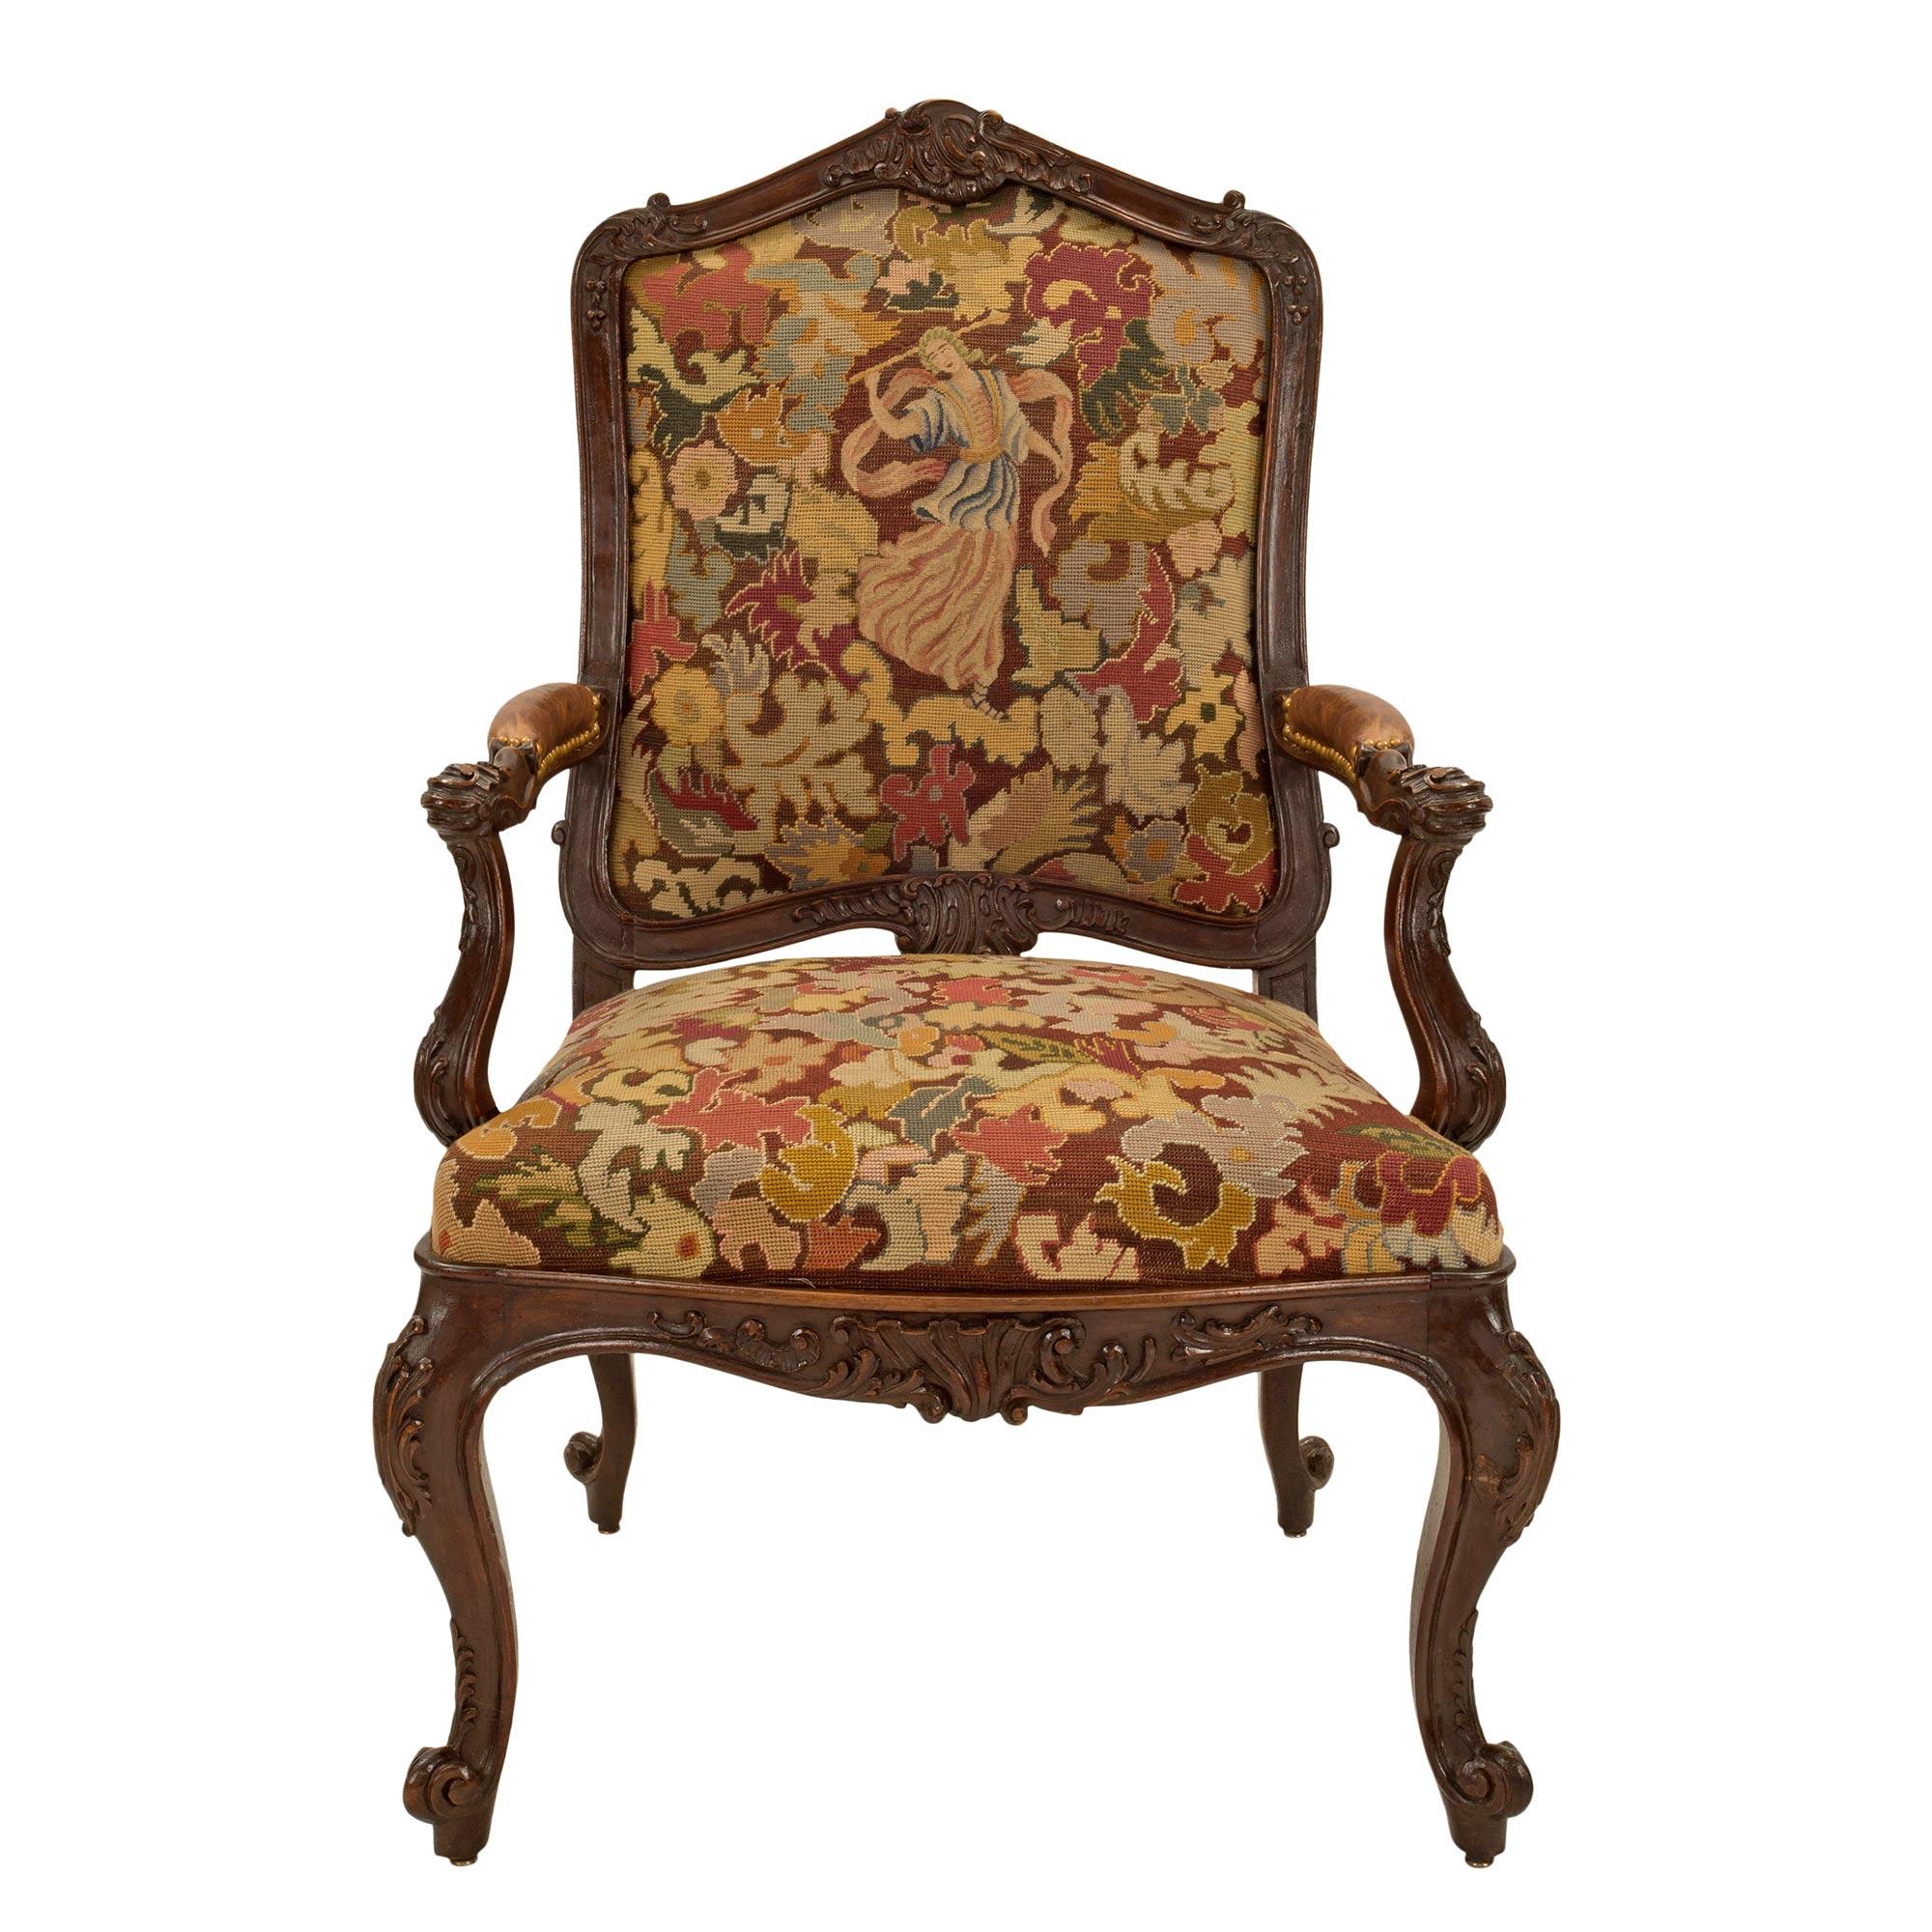 A beautiful pair of French 19th century Louis XV st. walnut and tapestry À Chasis armchairs. Each arm chair is raised by elegant cabriole legs with scrolled feet and richly carved foliate designs. The arbalest shaped frieze displays central foliate